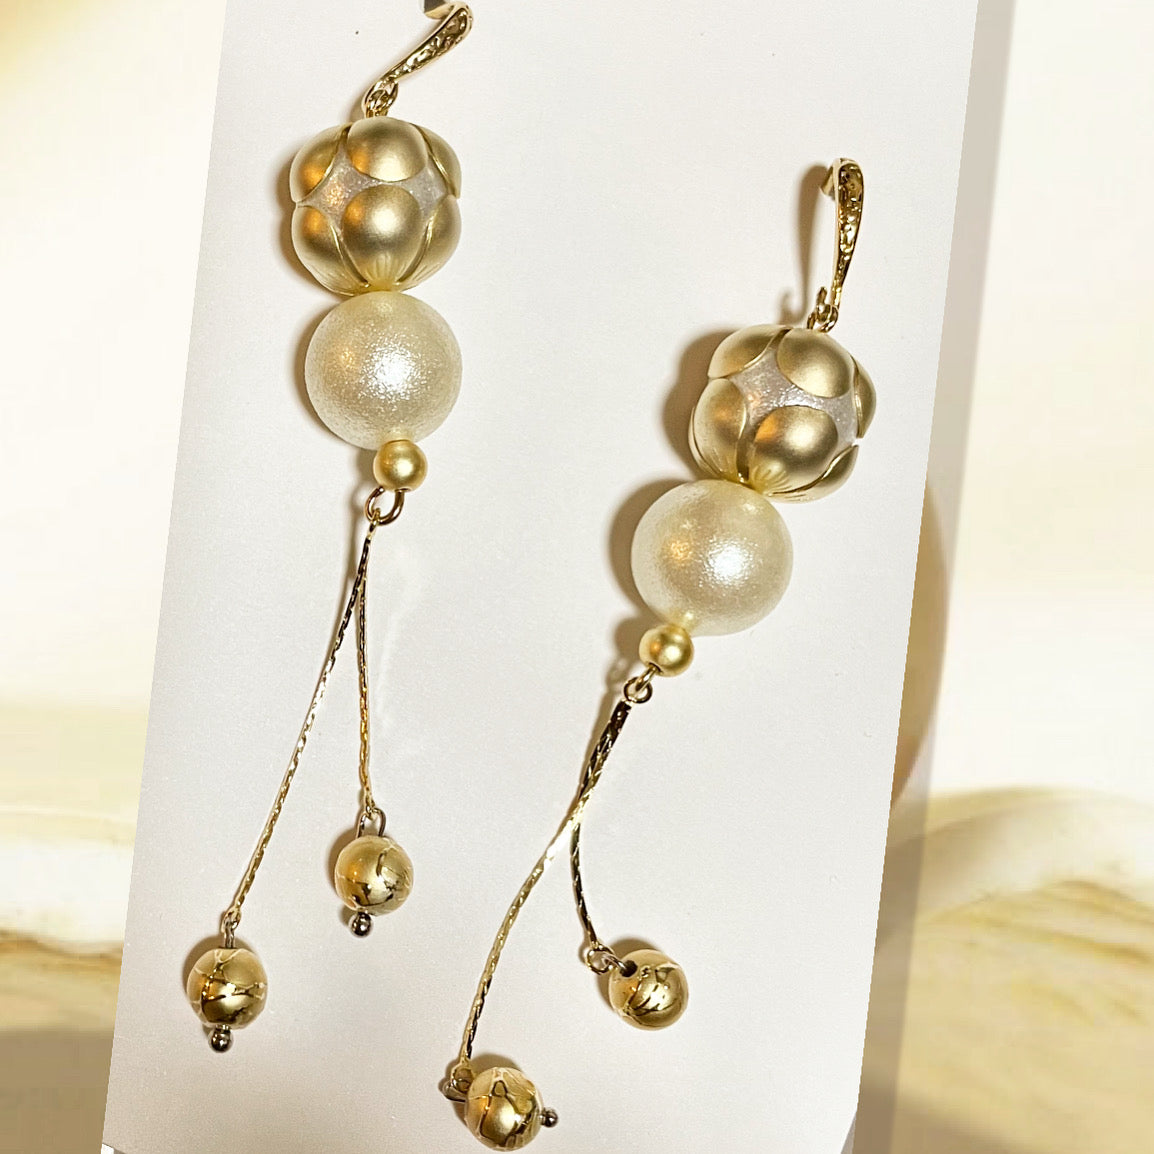 White cotton Pearl earrings with gold color frame